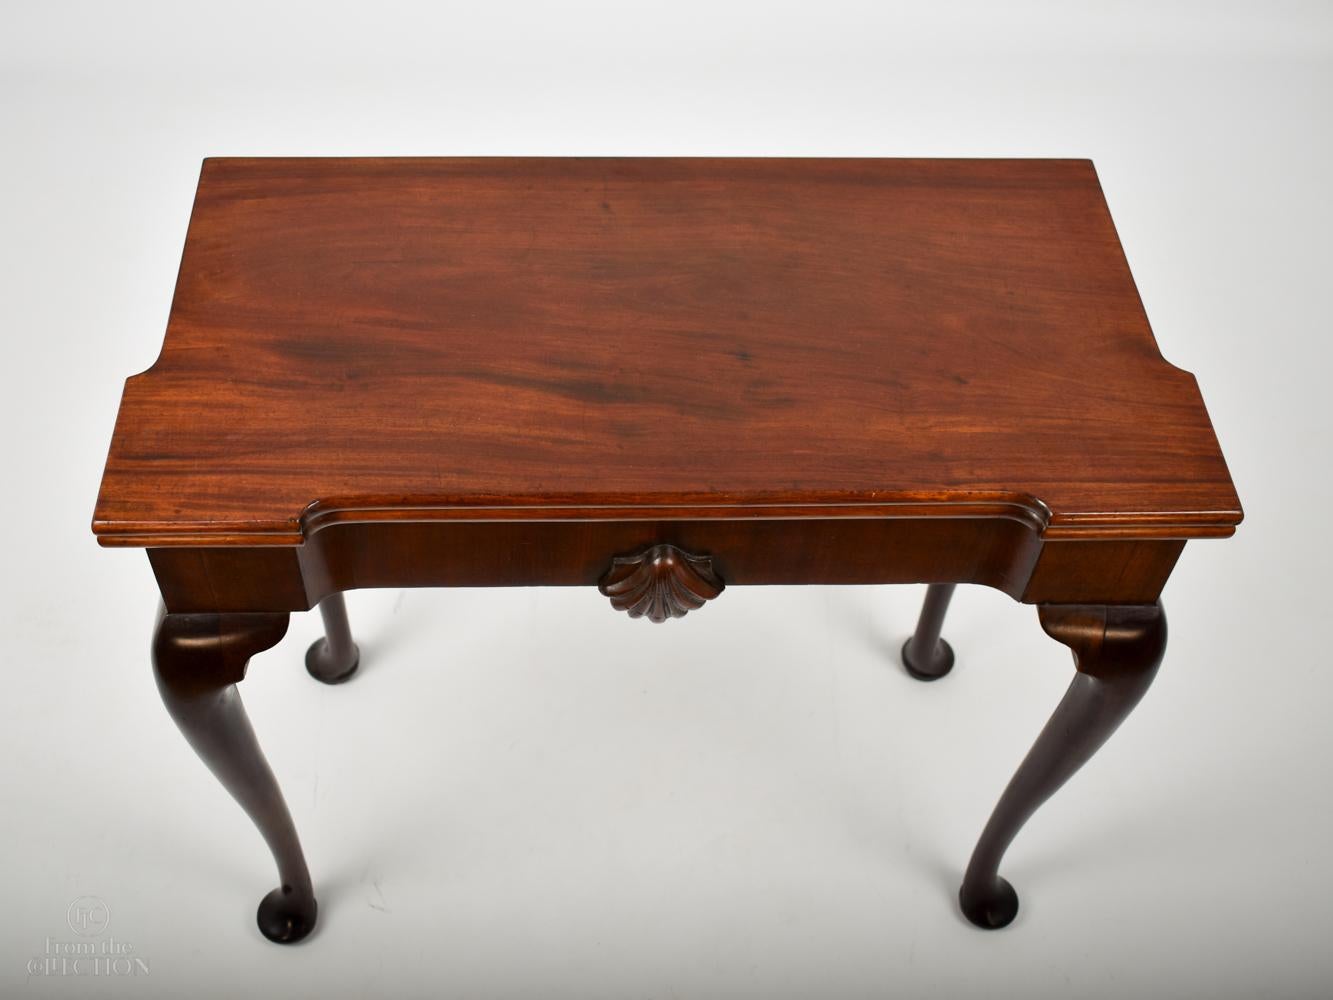 A fine mahogany Irish games table circa. 1770. This table folds out on a concertina leg mechanism to a green baize top with four counter wells and four square candle or glass holders. The table top sits on four cabriole legs with pad feet. In